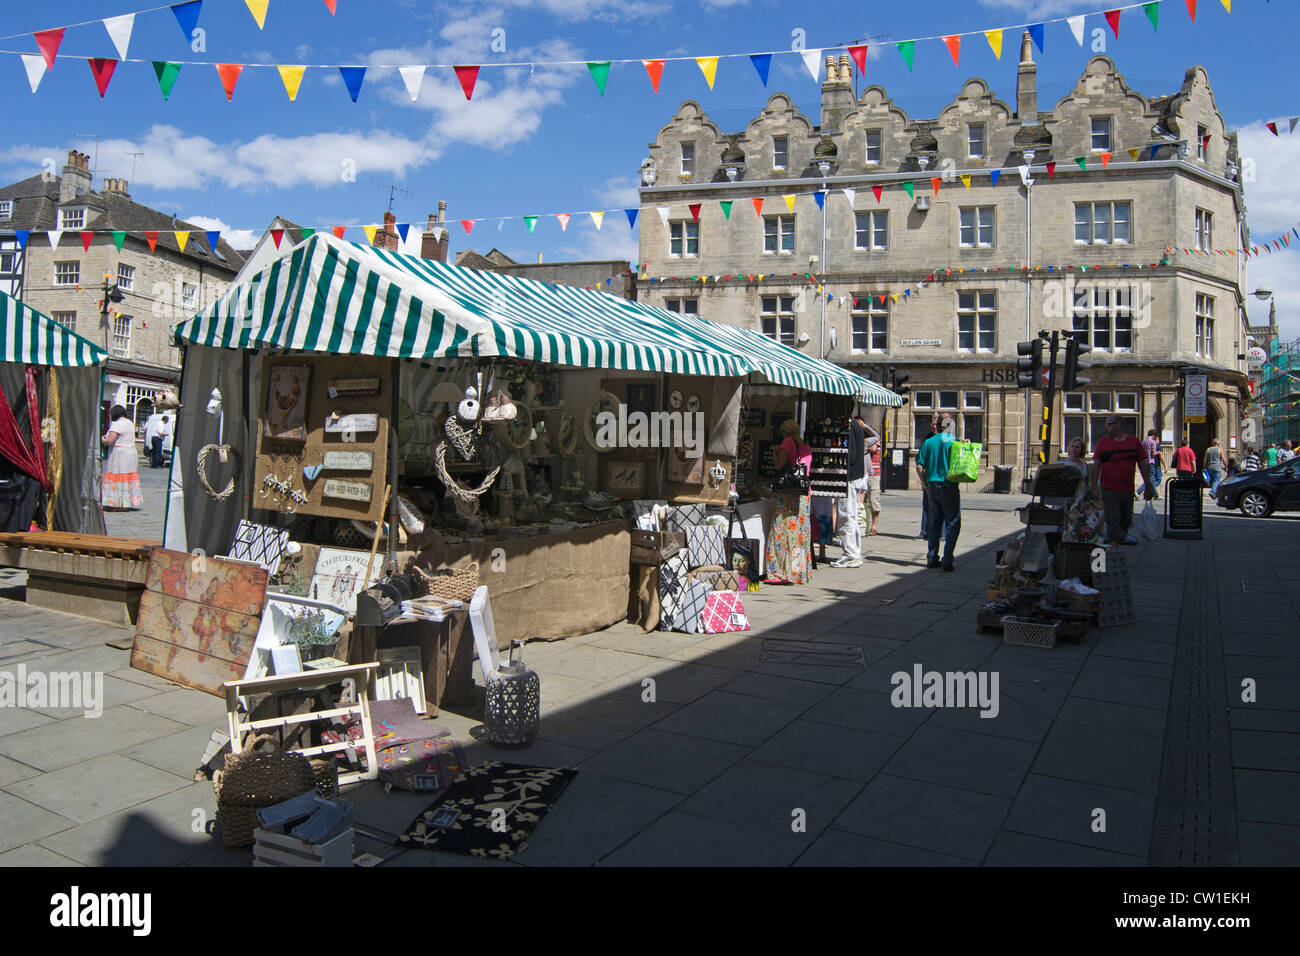 Market Stalls in Red Lion Square, Stamford, South Kesteven district of the county of Lincolnshire, England, UK Stock Photo